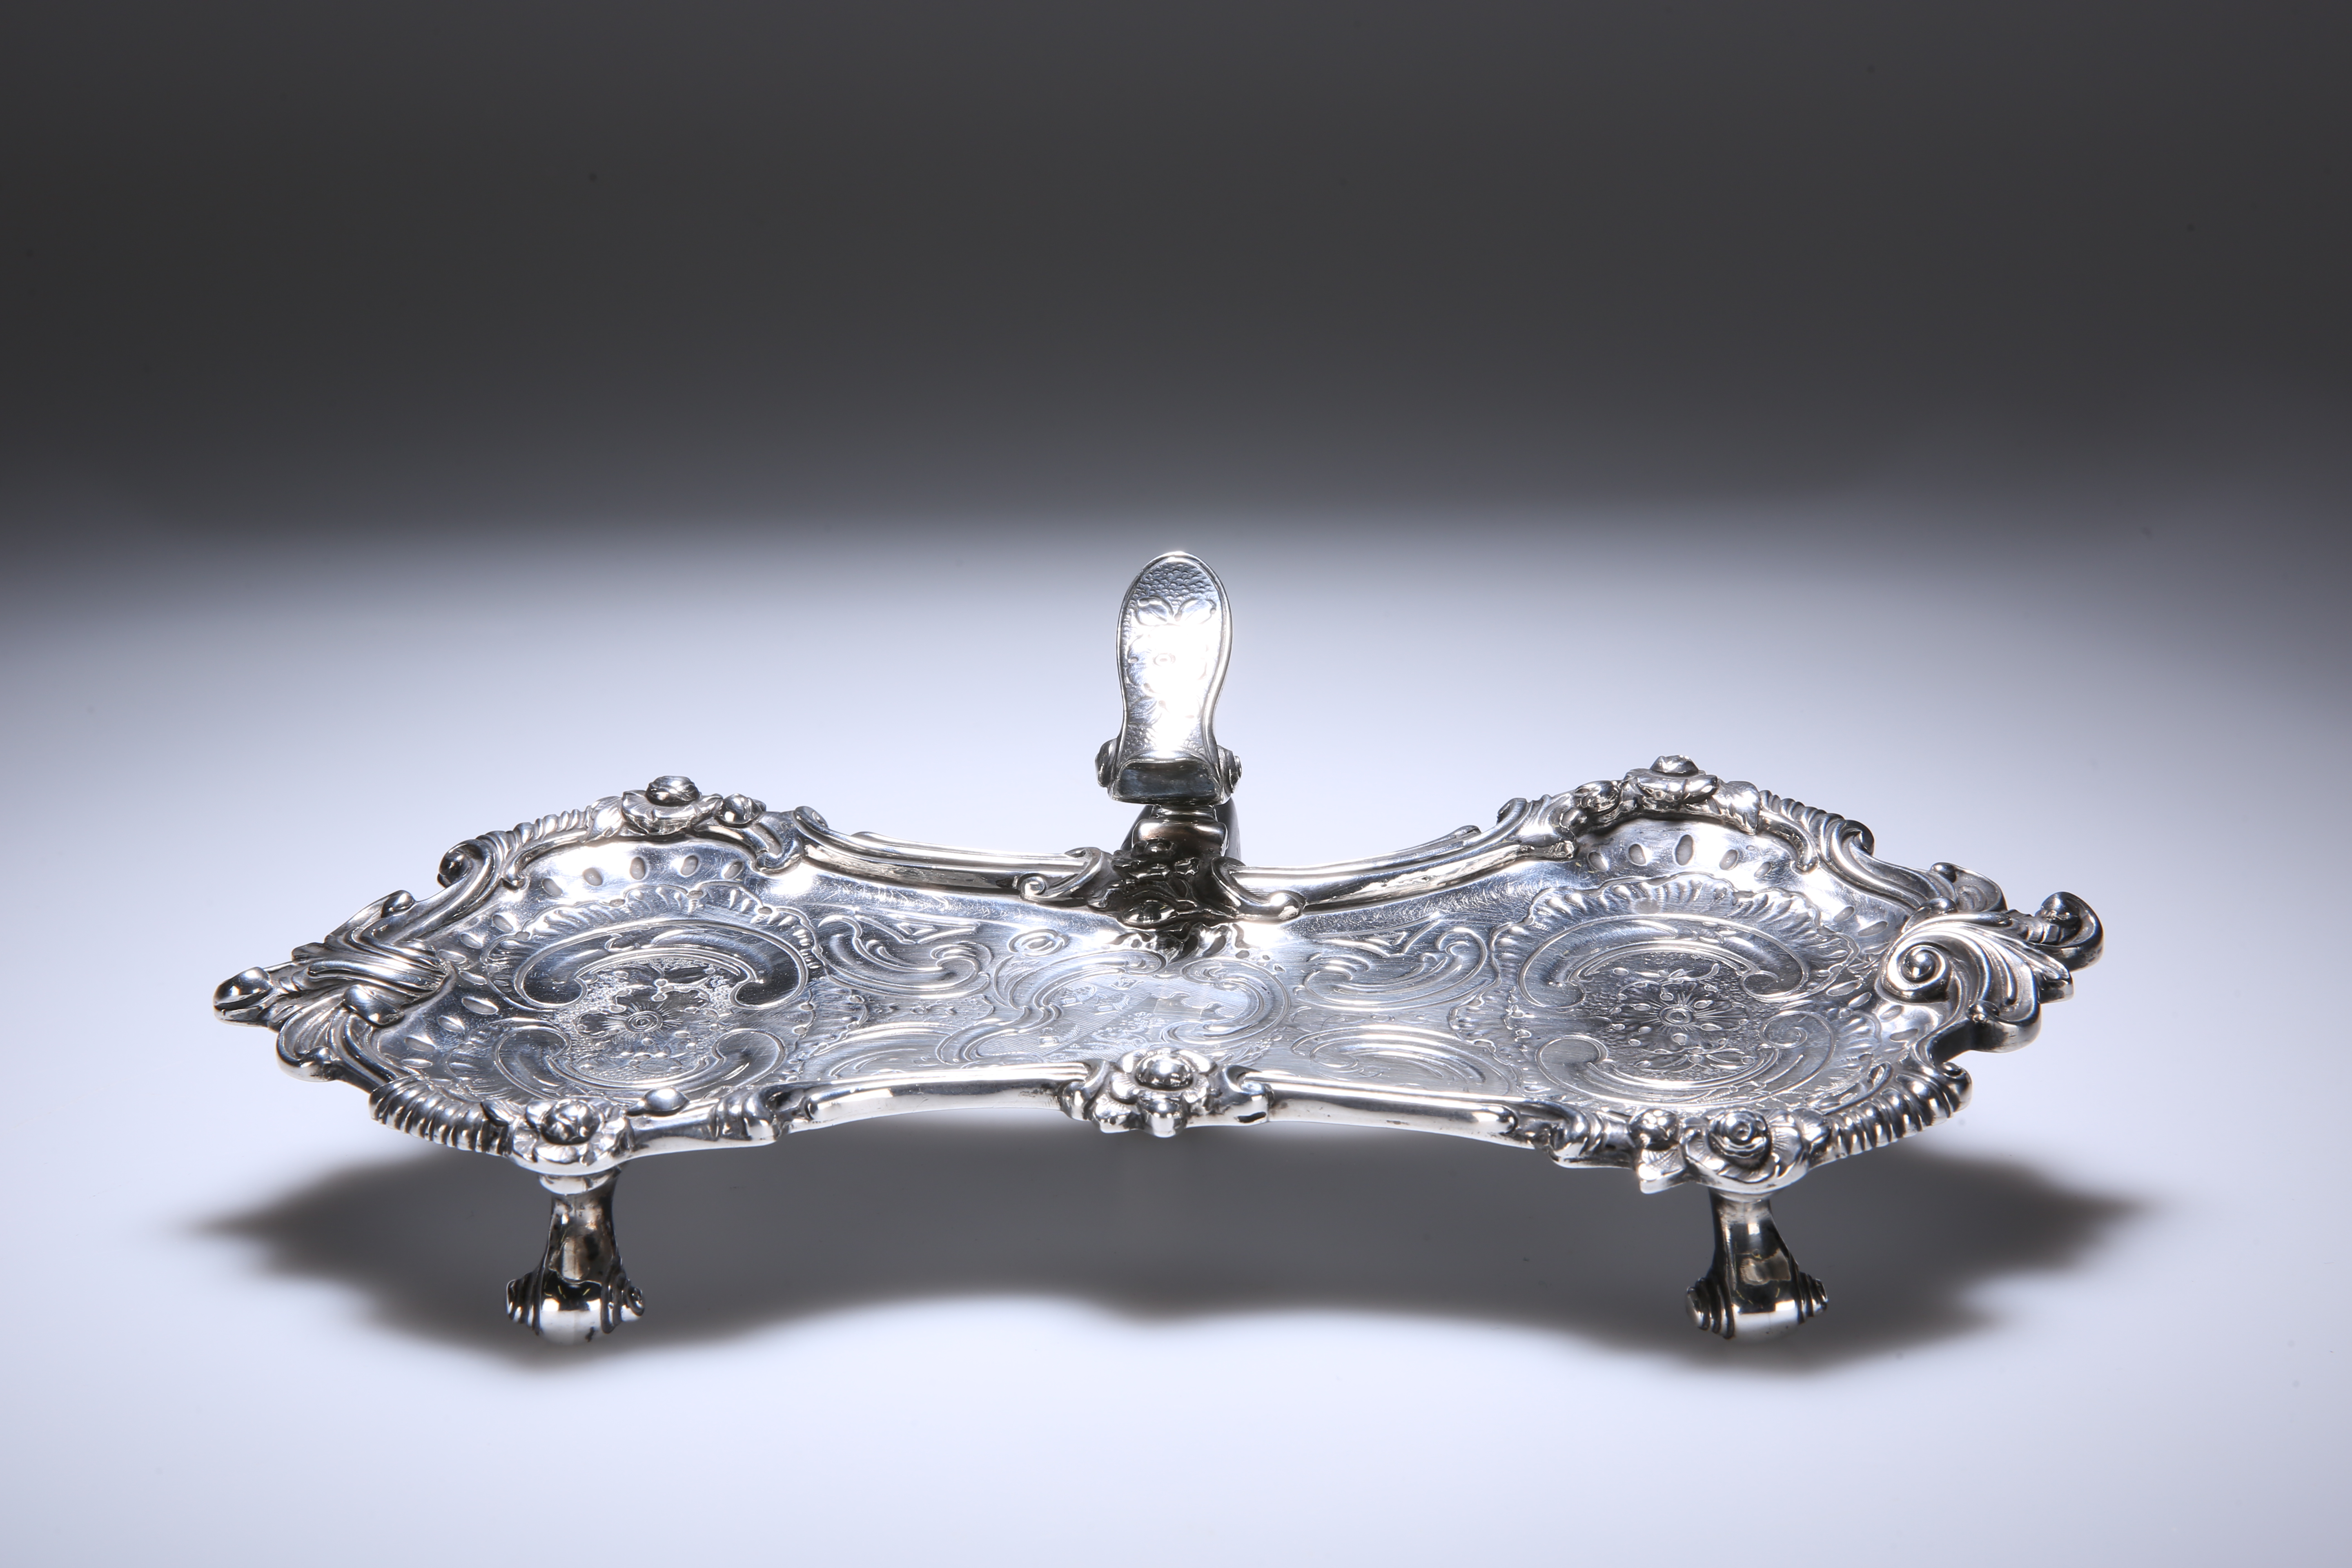 A GEORGE III SILVER SNUFFER TRAY, LONDON 1817, MAKER PROBABLY SAMUEL WHITFORD II